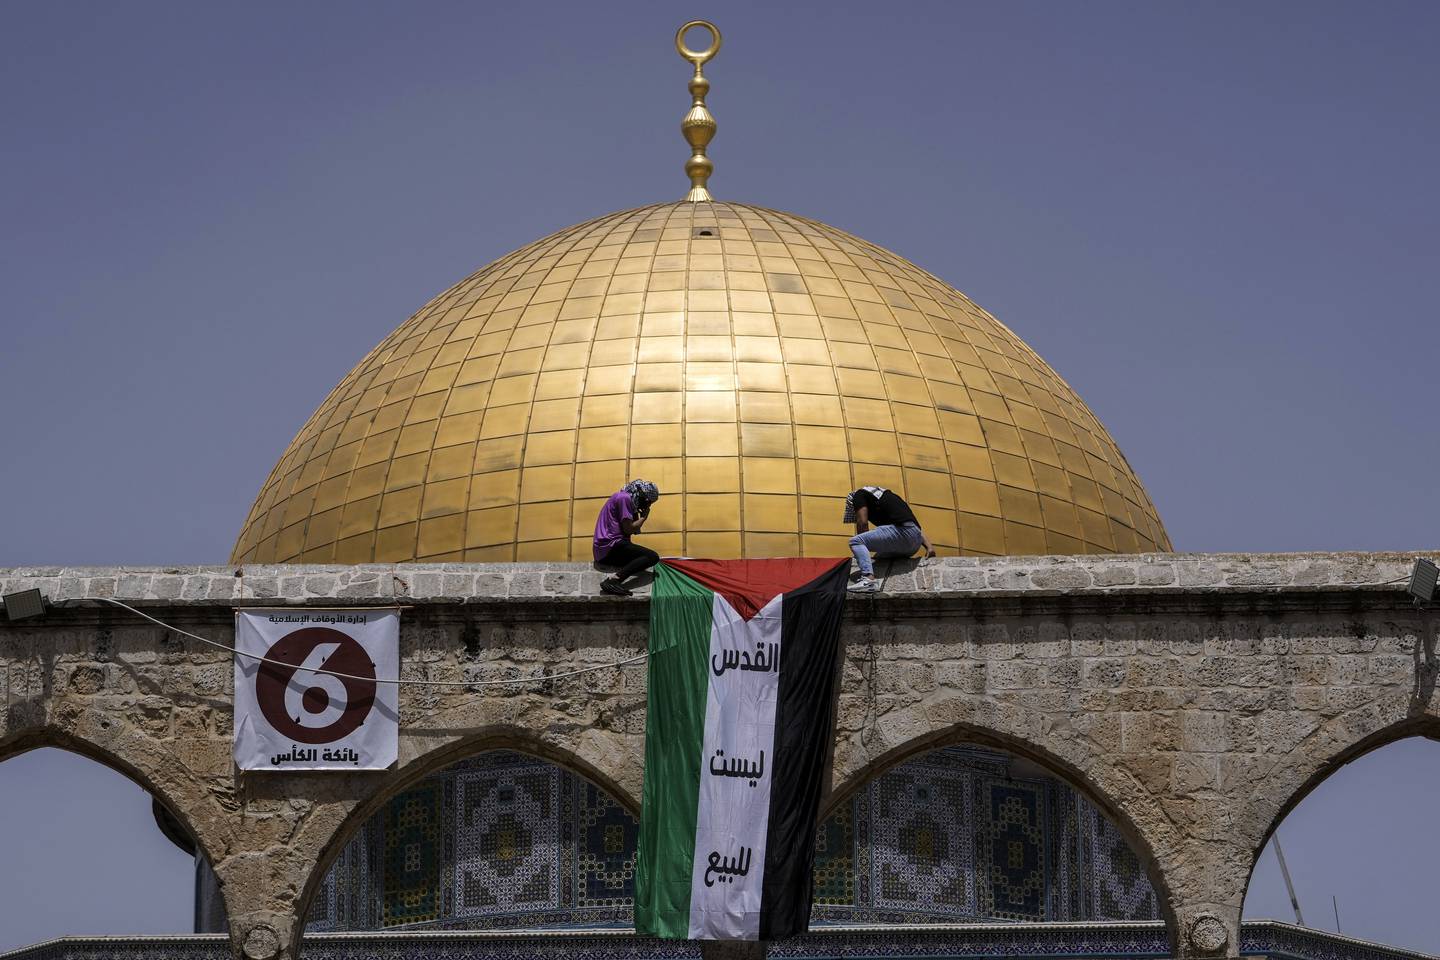 Masked Palestinians hang the national flag during Ramadan in front of the Dome of the Rock shrine at the Al Aqsa Mosque compound in Jerusalem's Old City in April. AP Photo